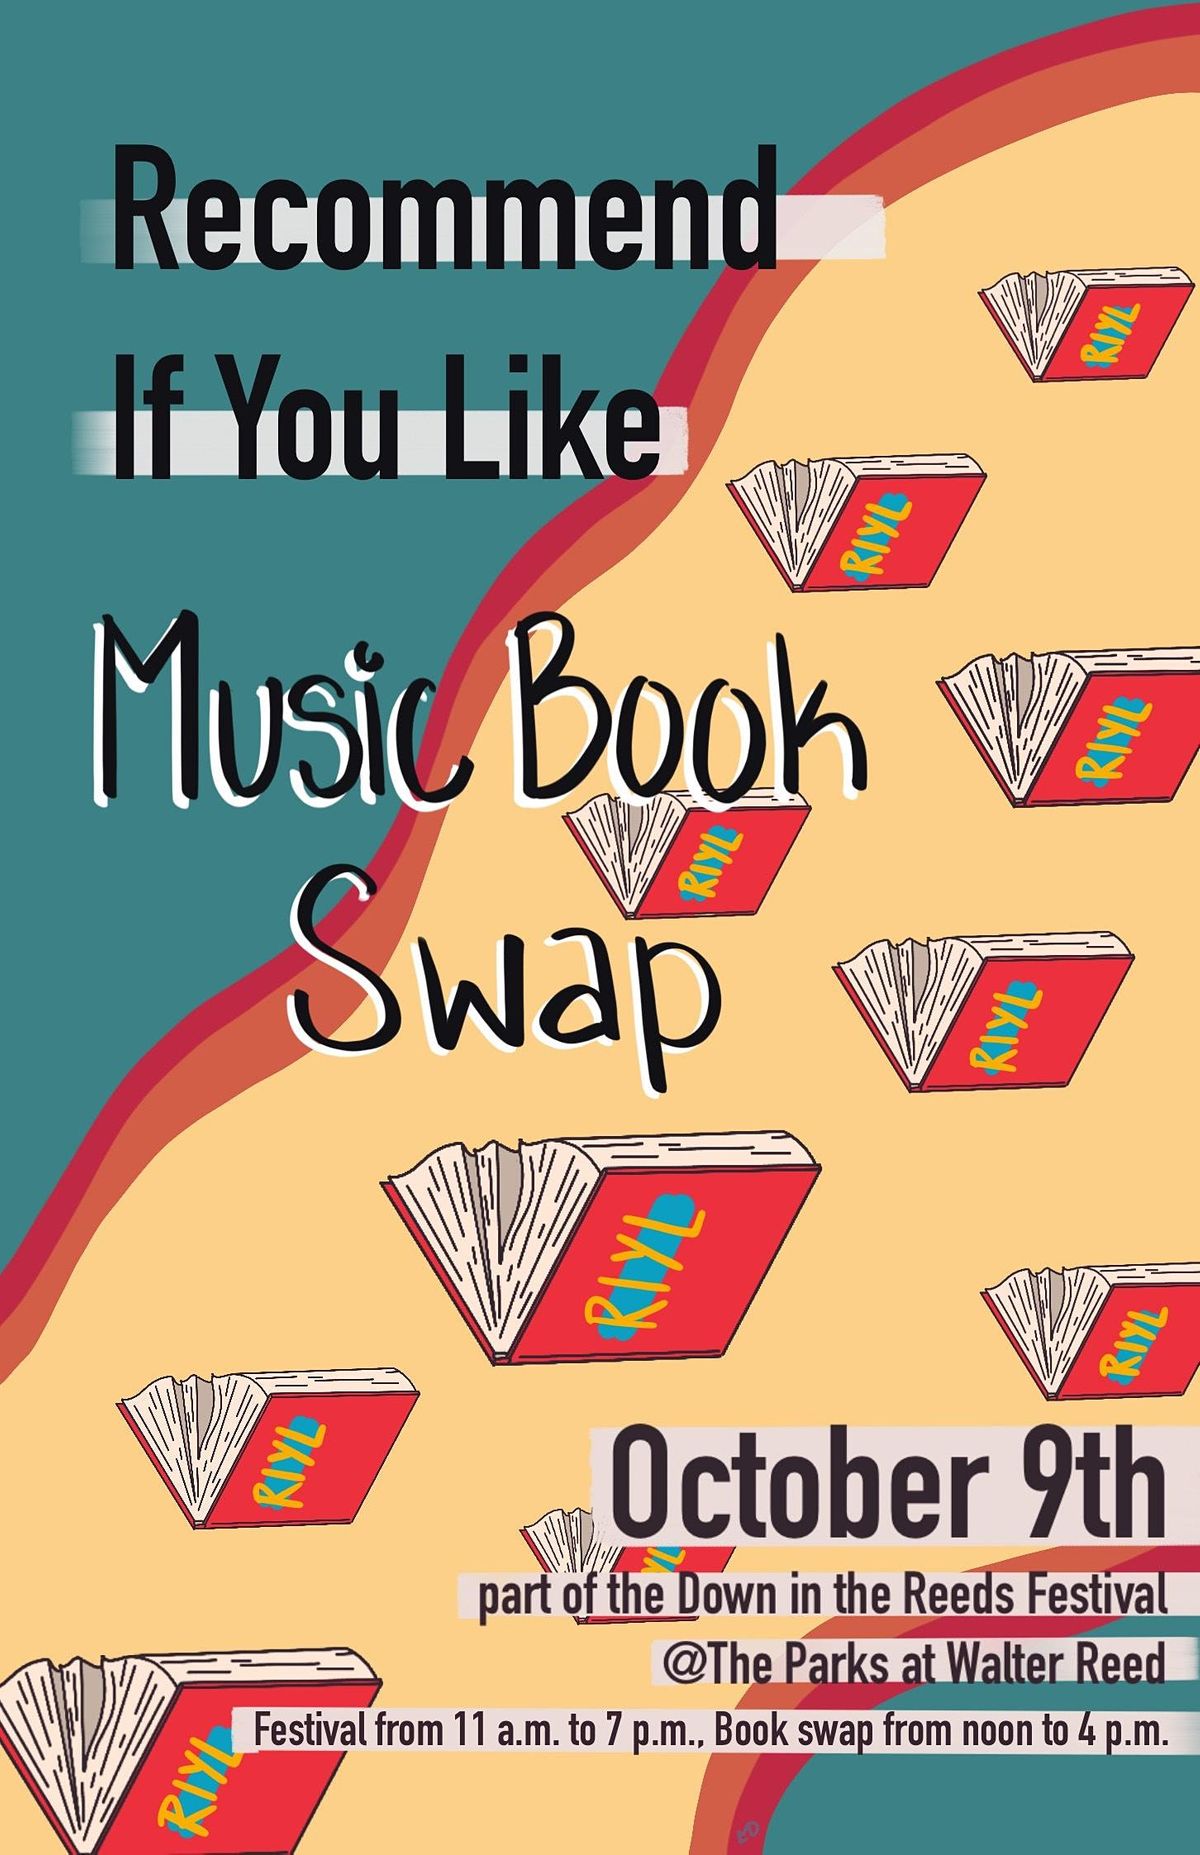 Music Book Swap at Down in the Reeds